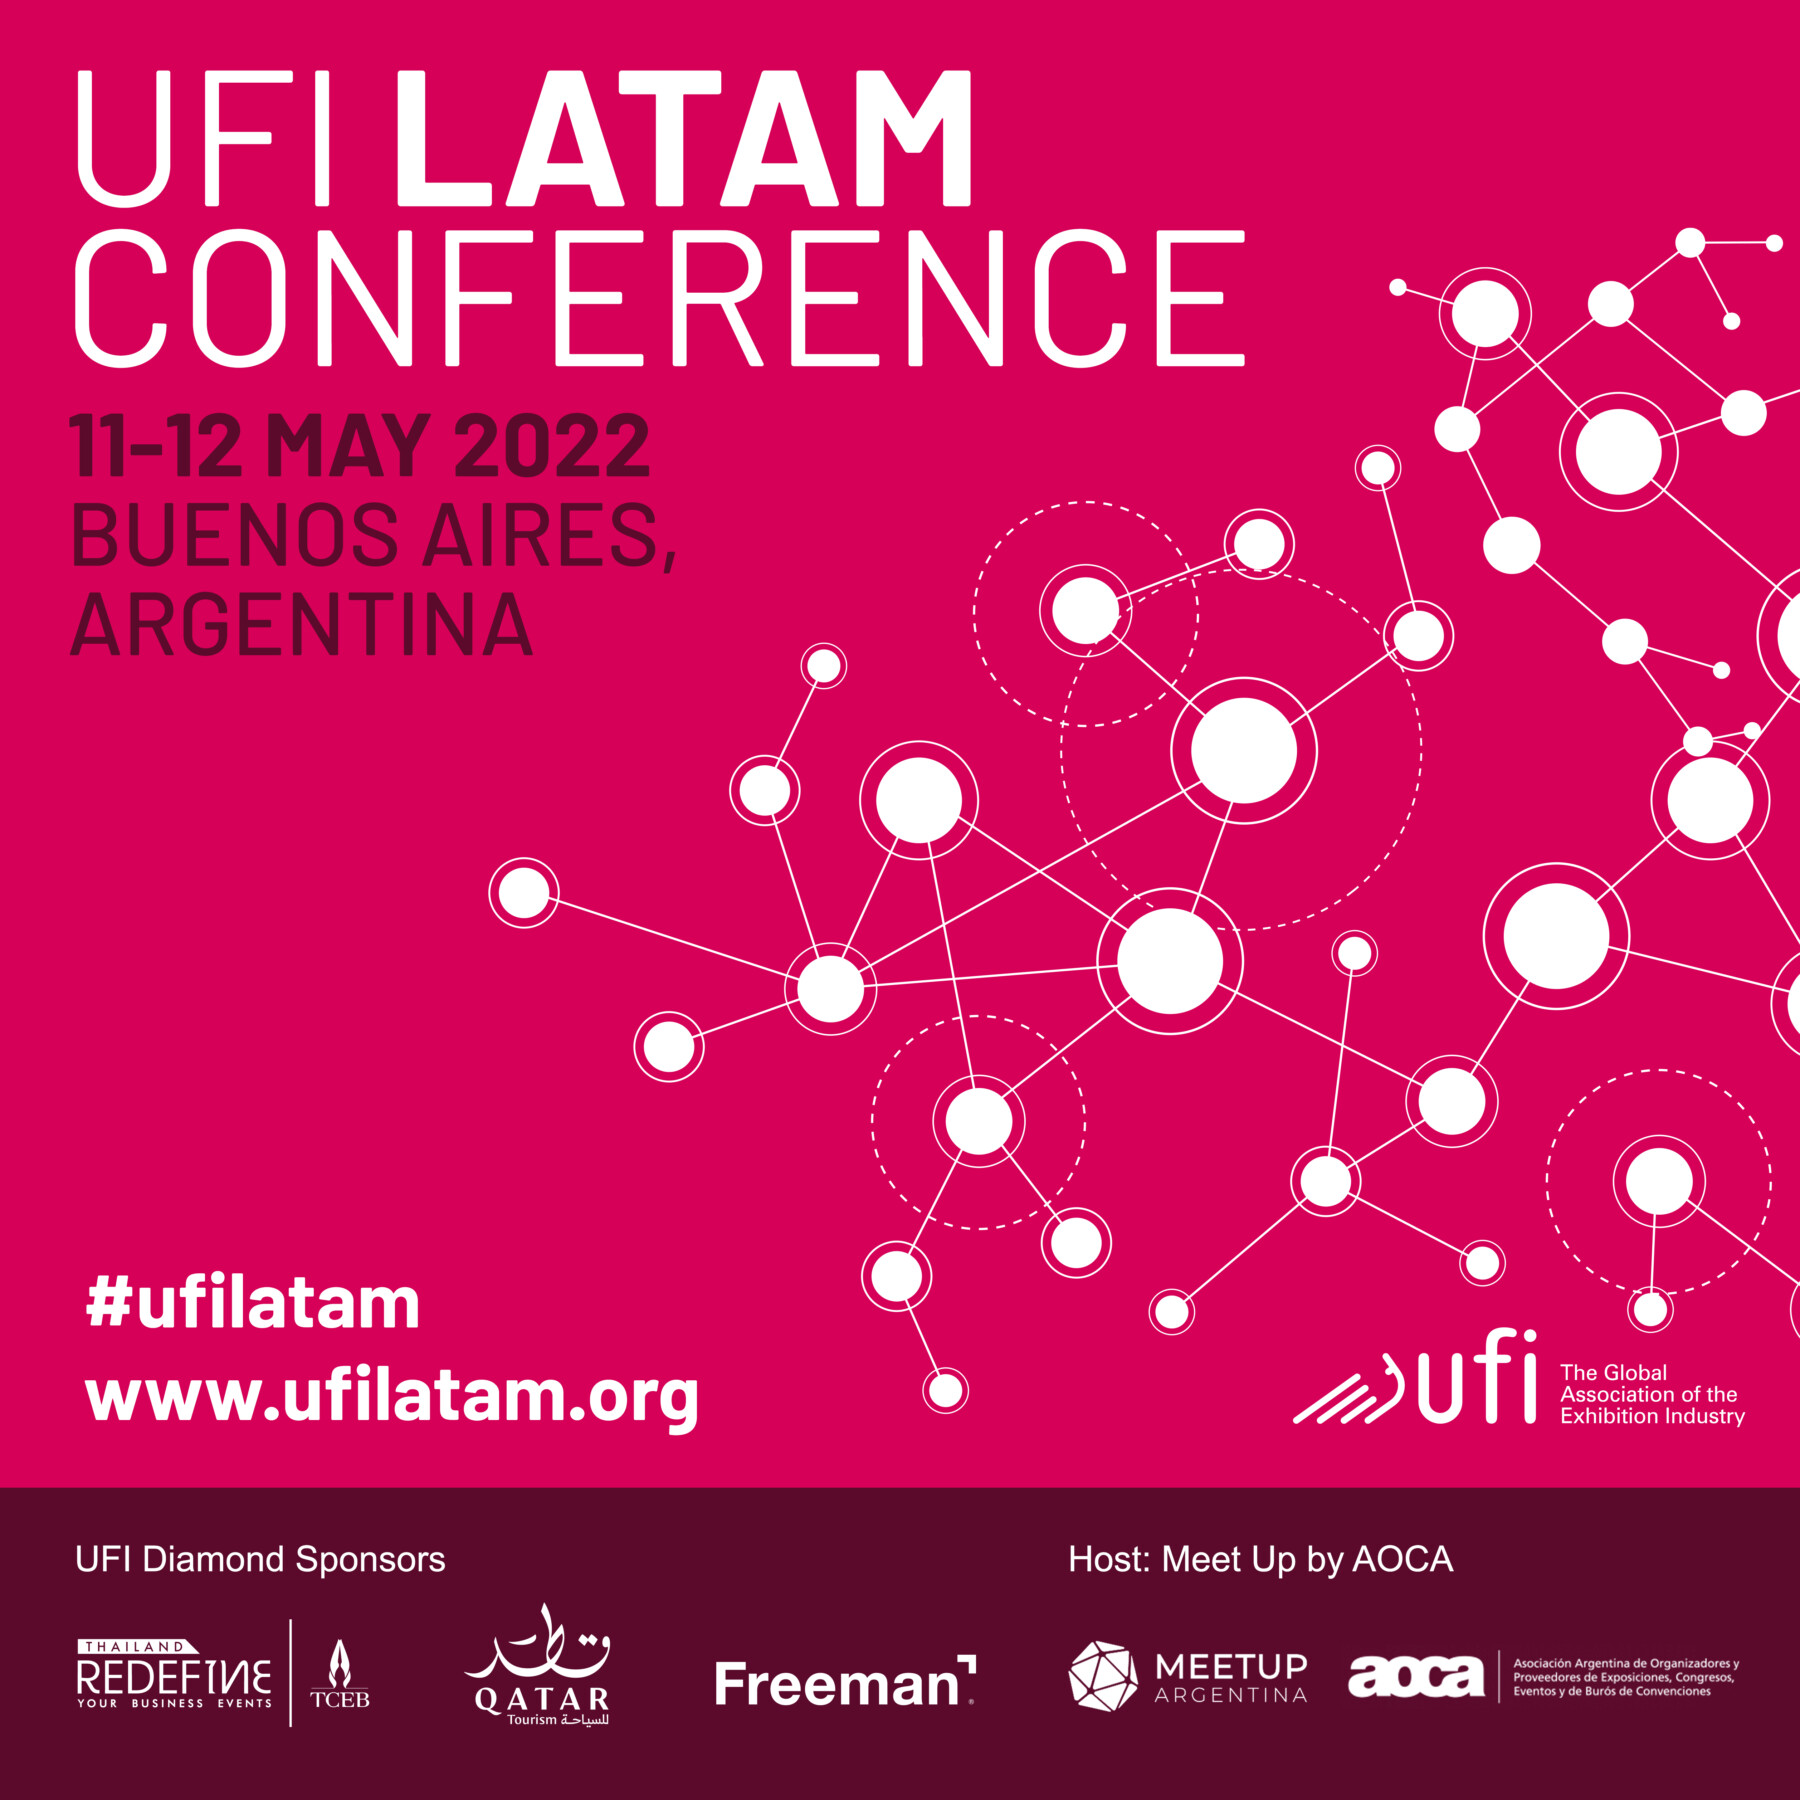 UFI LATAM Conference brings industry leaders from across the region